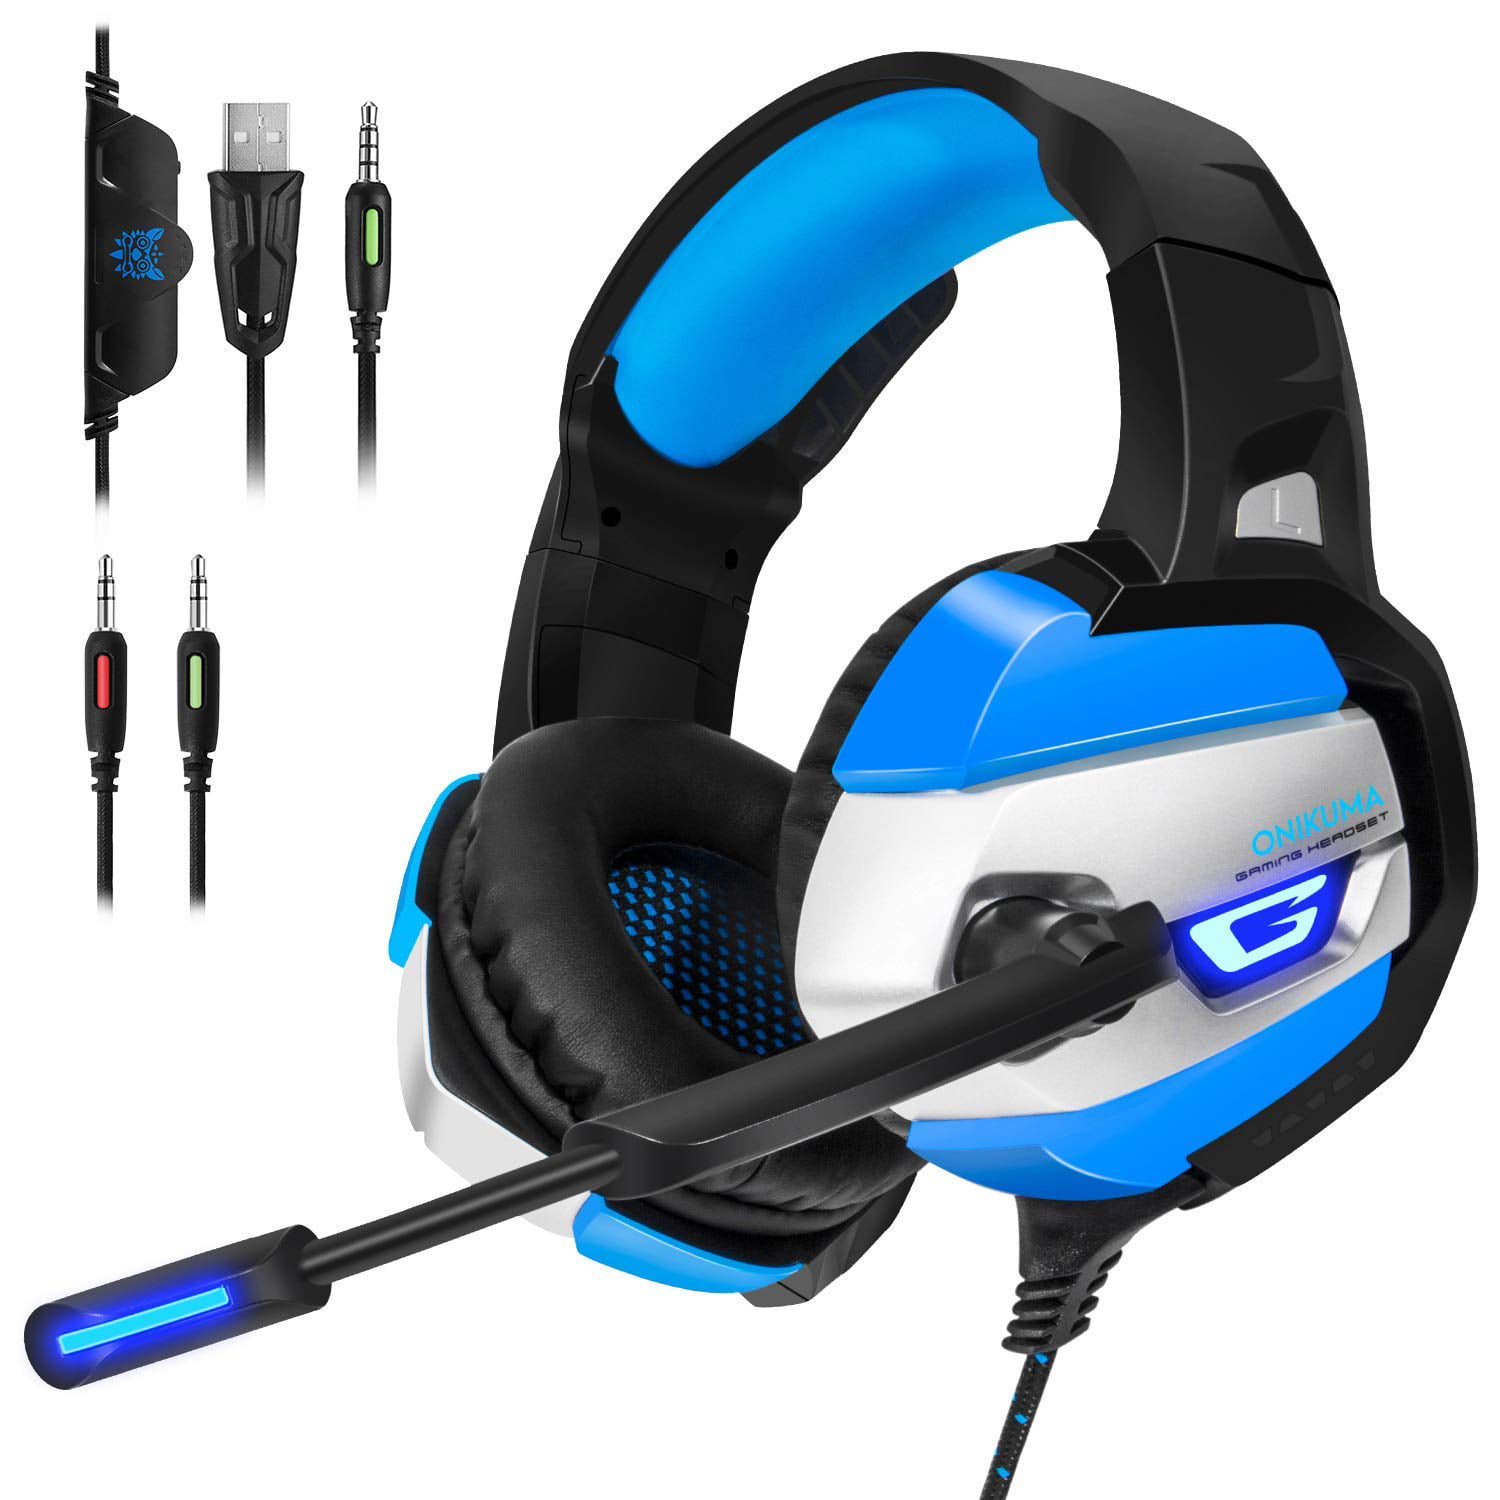 PS4 Xbox One Gaming Headset, OMIKUMA K5 Over-Ear Gaming Headphones with Mic, Stereo Bass Surround, LED Lights and Volume Control for PC, Mac and Smartphone